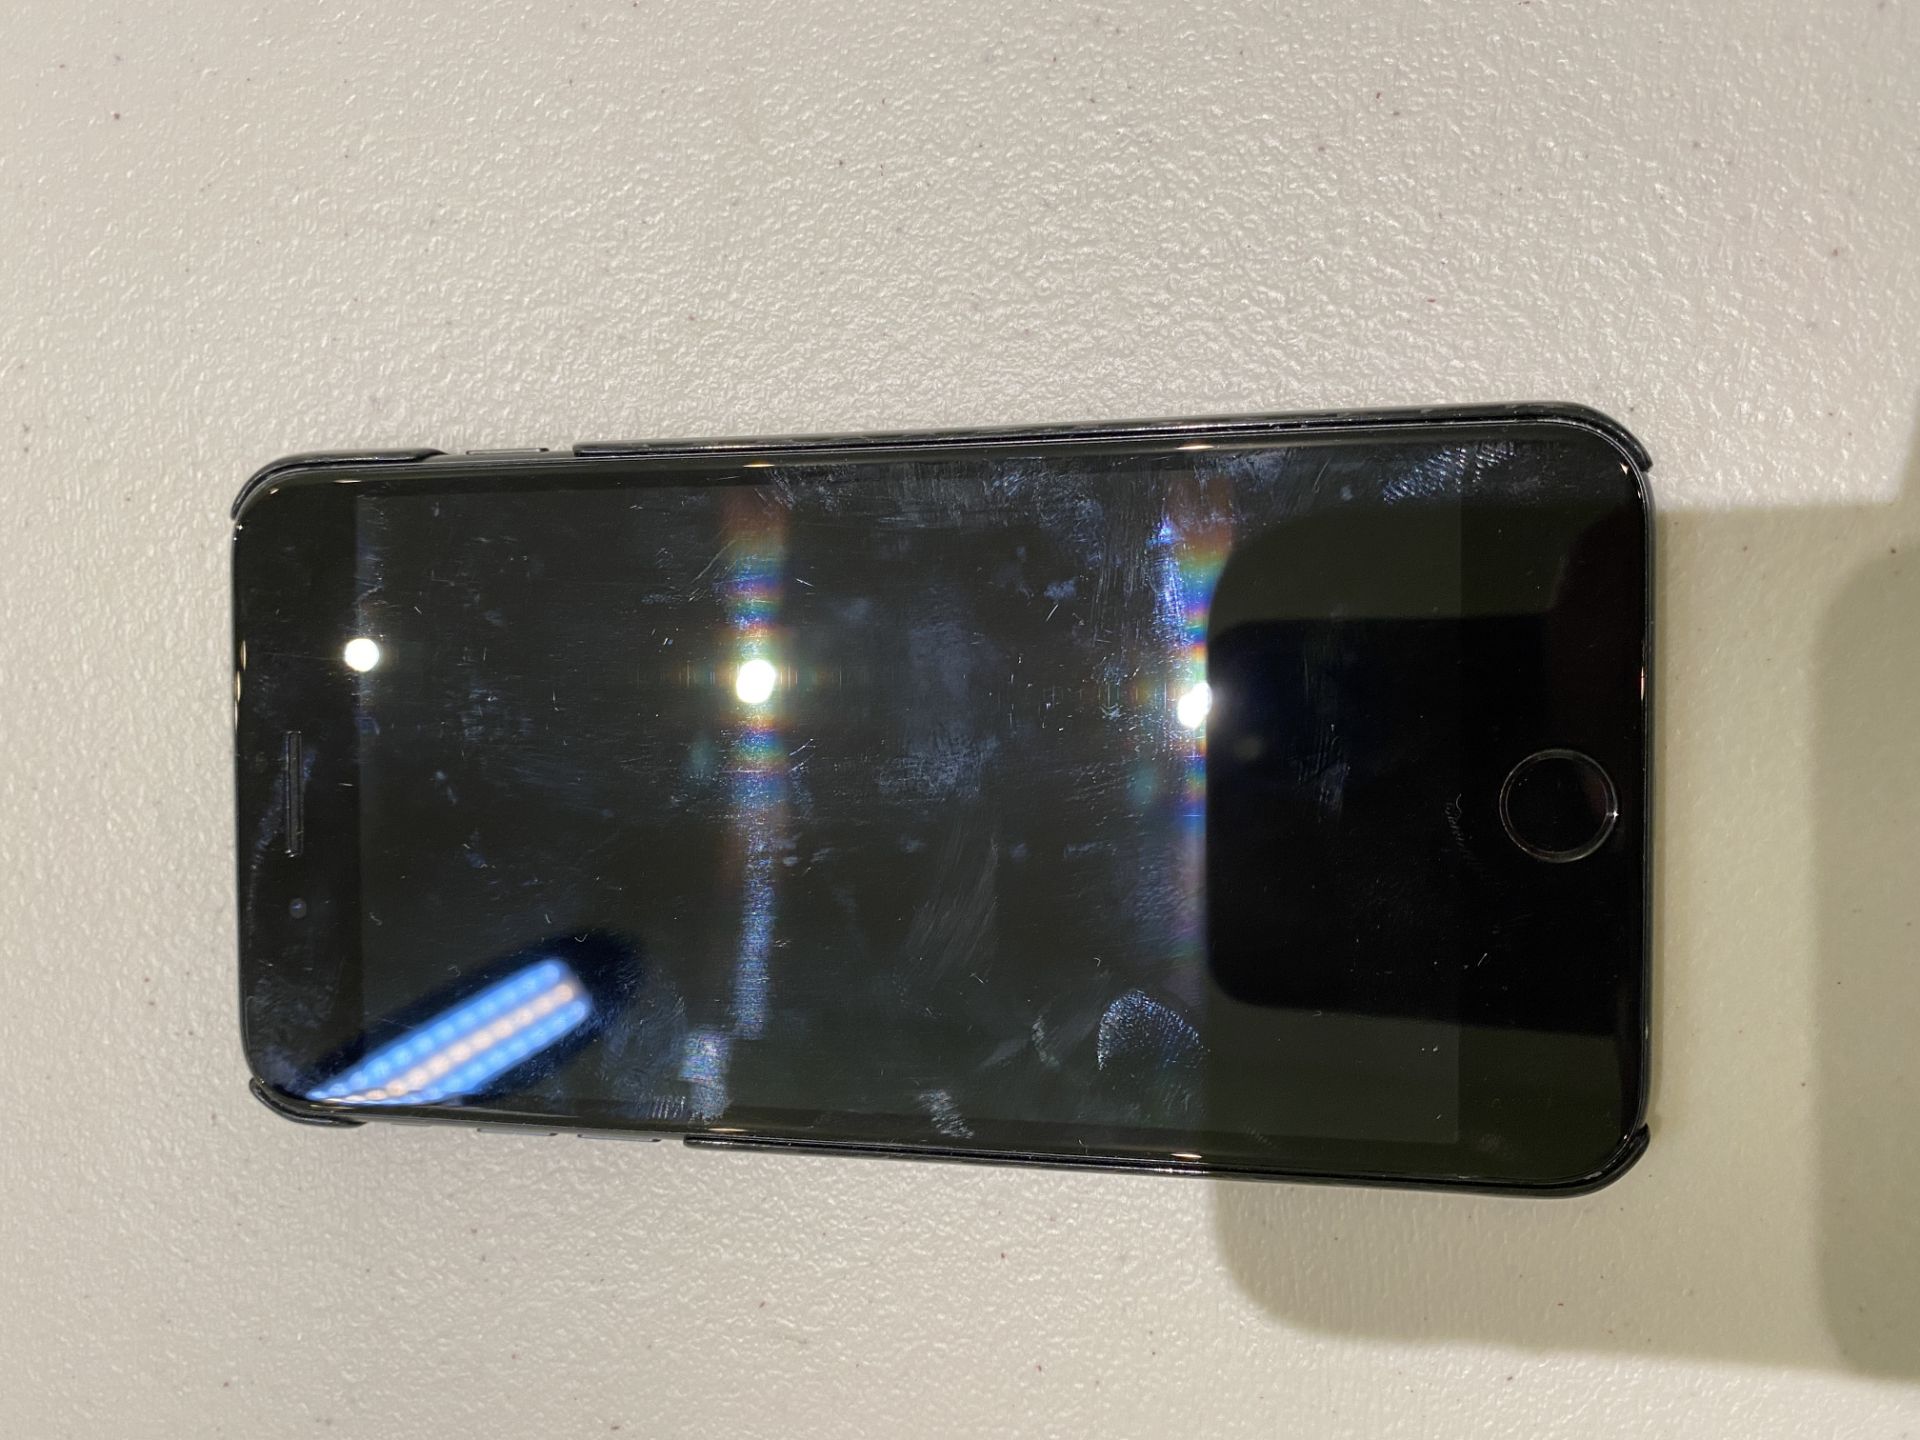 Apple Iphone 6 Plus 64 GB - Black - Had New Screen Fitted, Which is Now Unresponsive - Has Been Fact